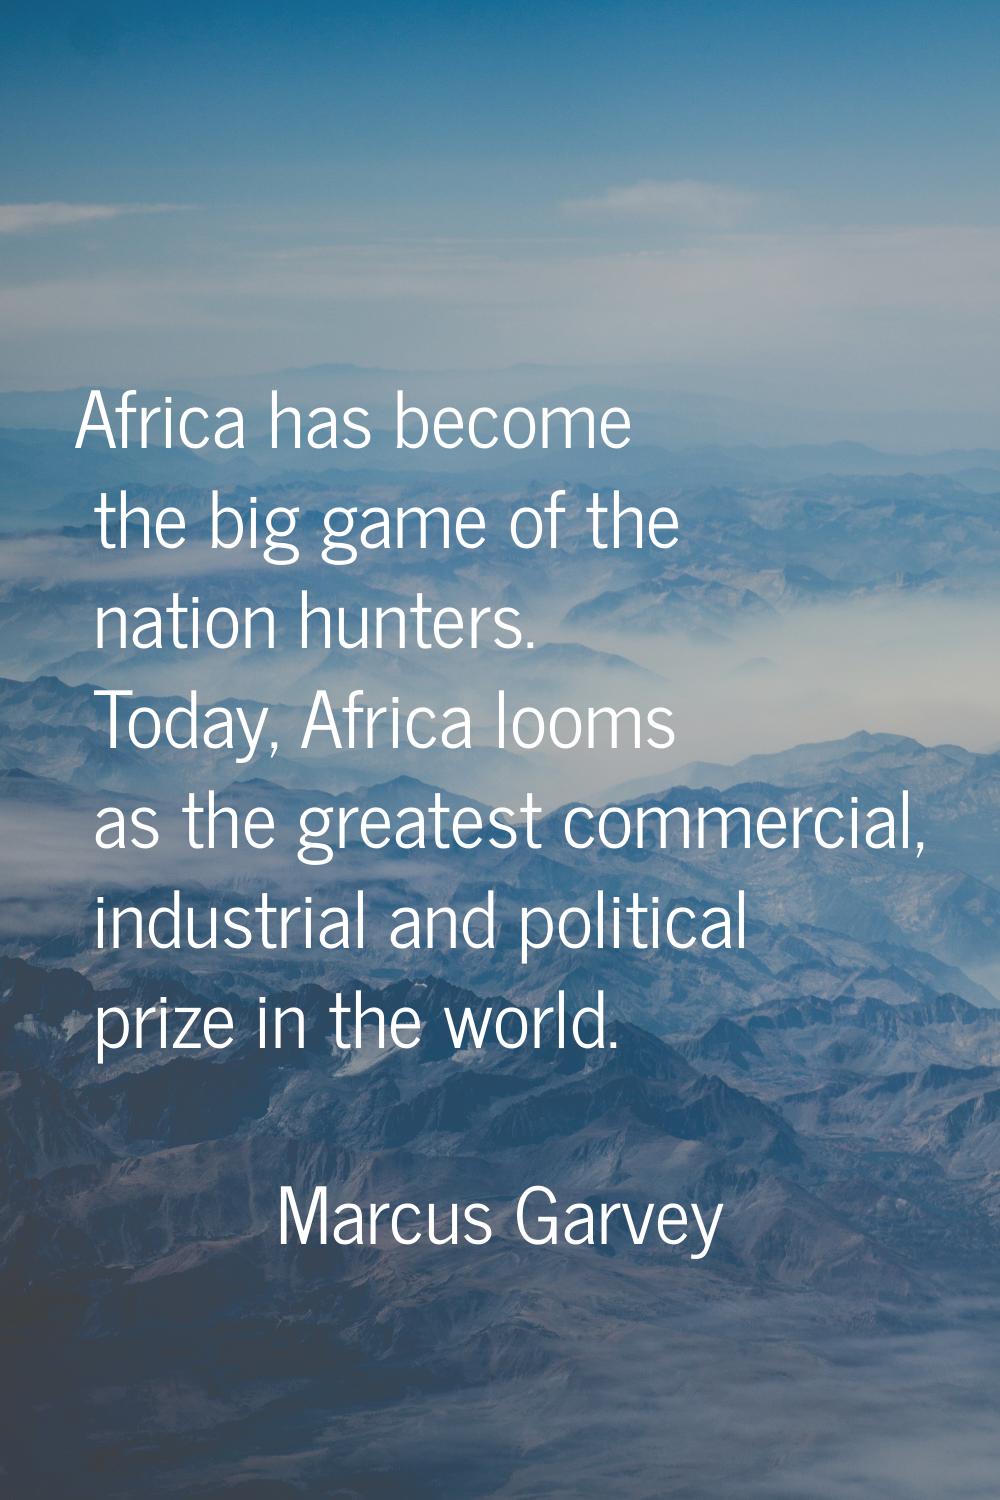 Africa has become the big game of the nation hunters. Today, Africa looms as the greatest commercia